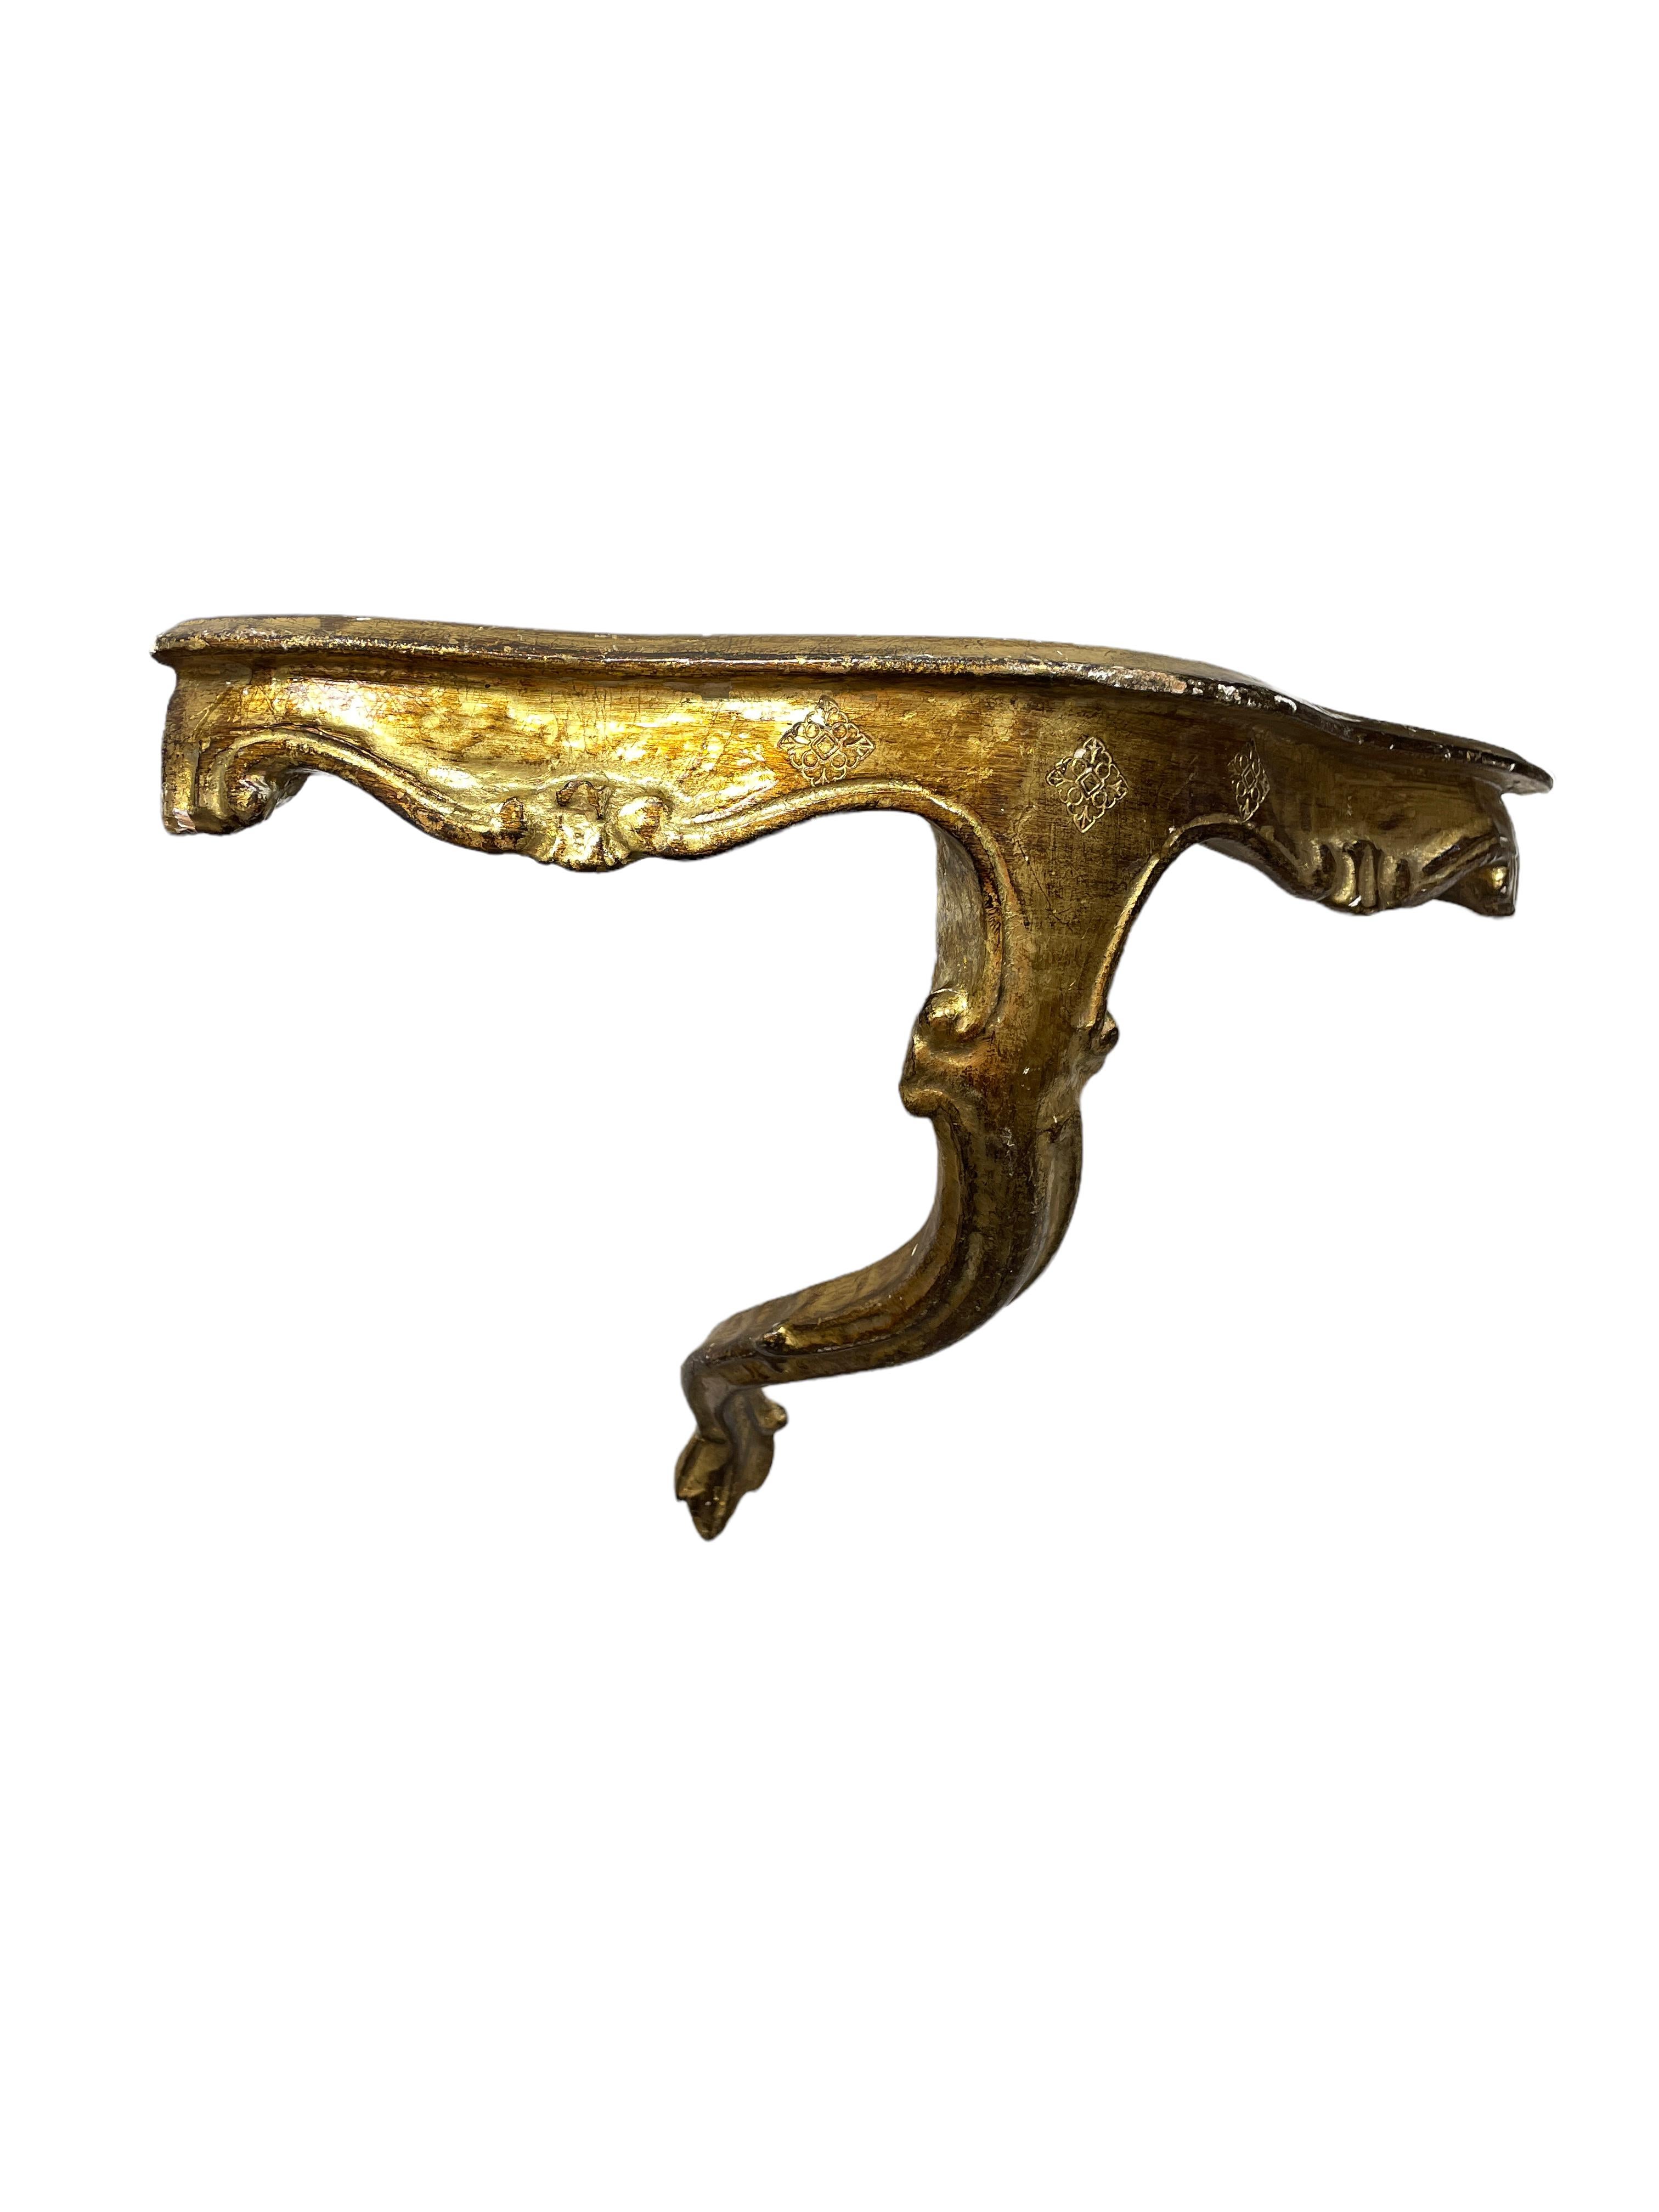 Vintage Florence Wall Corner Shelf Console, Gilded Carved Wood, Florentine Style For Sale 8